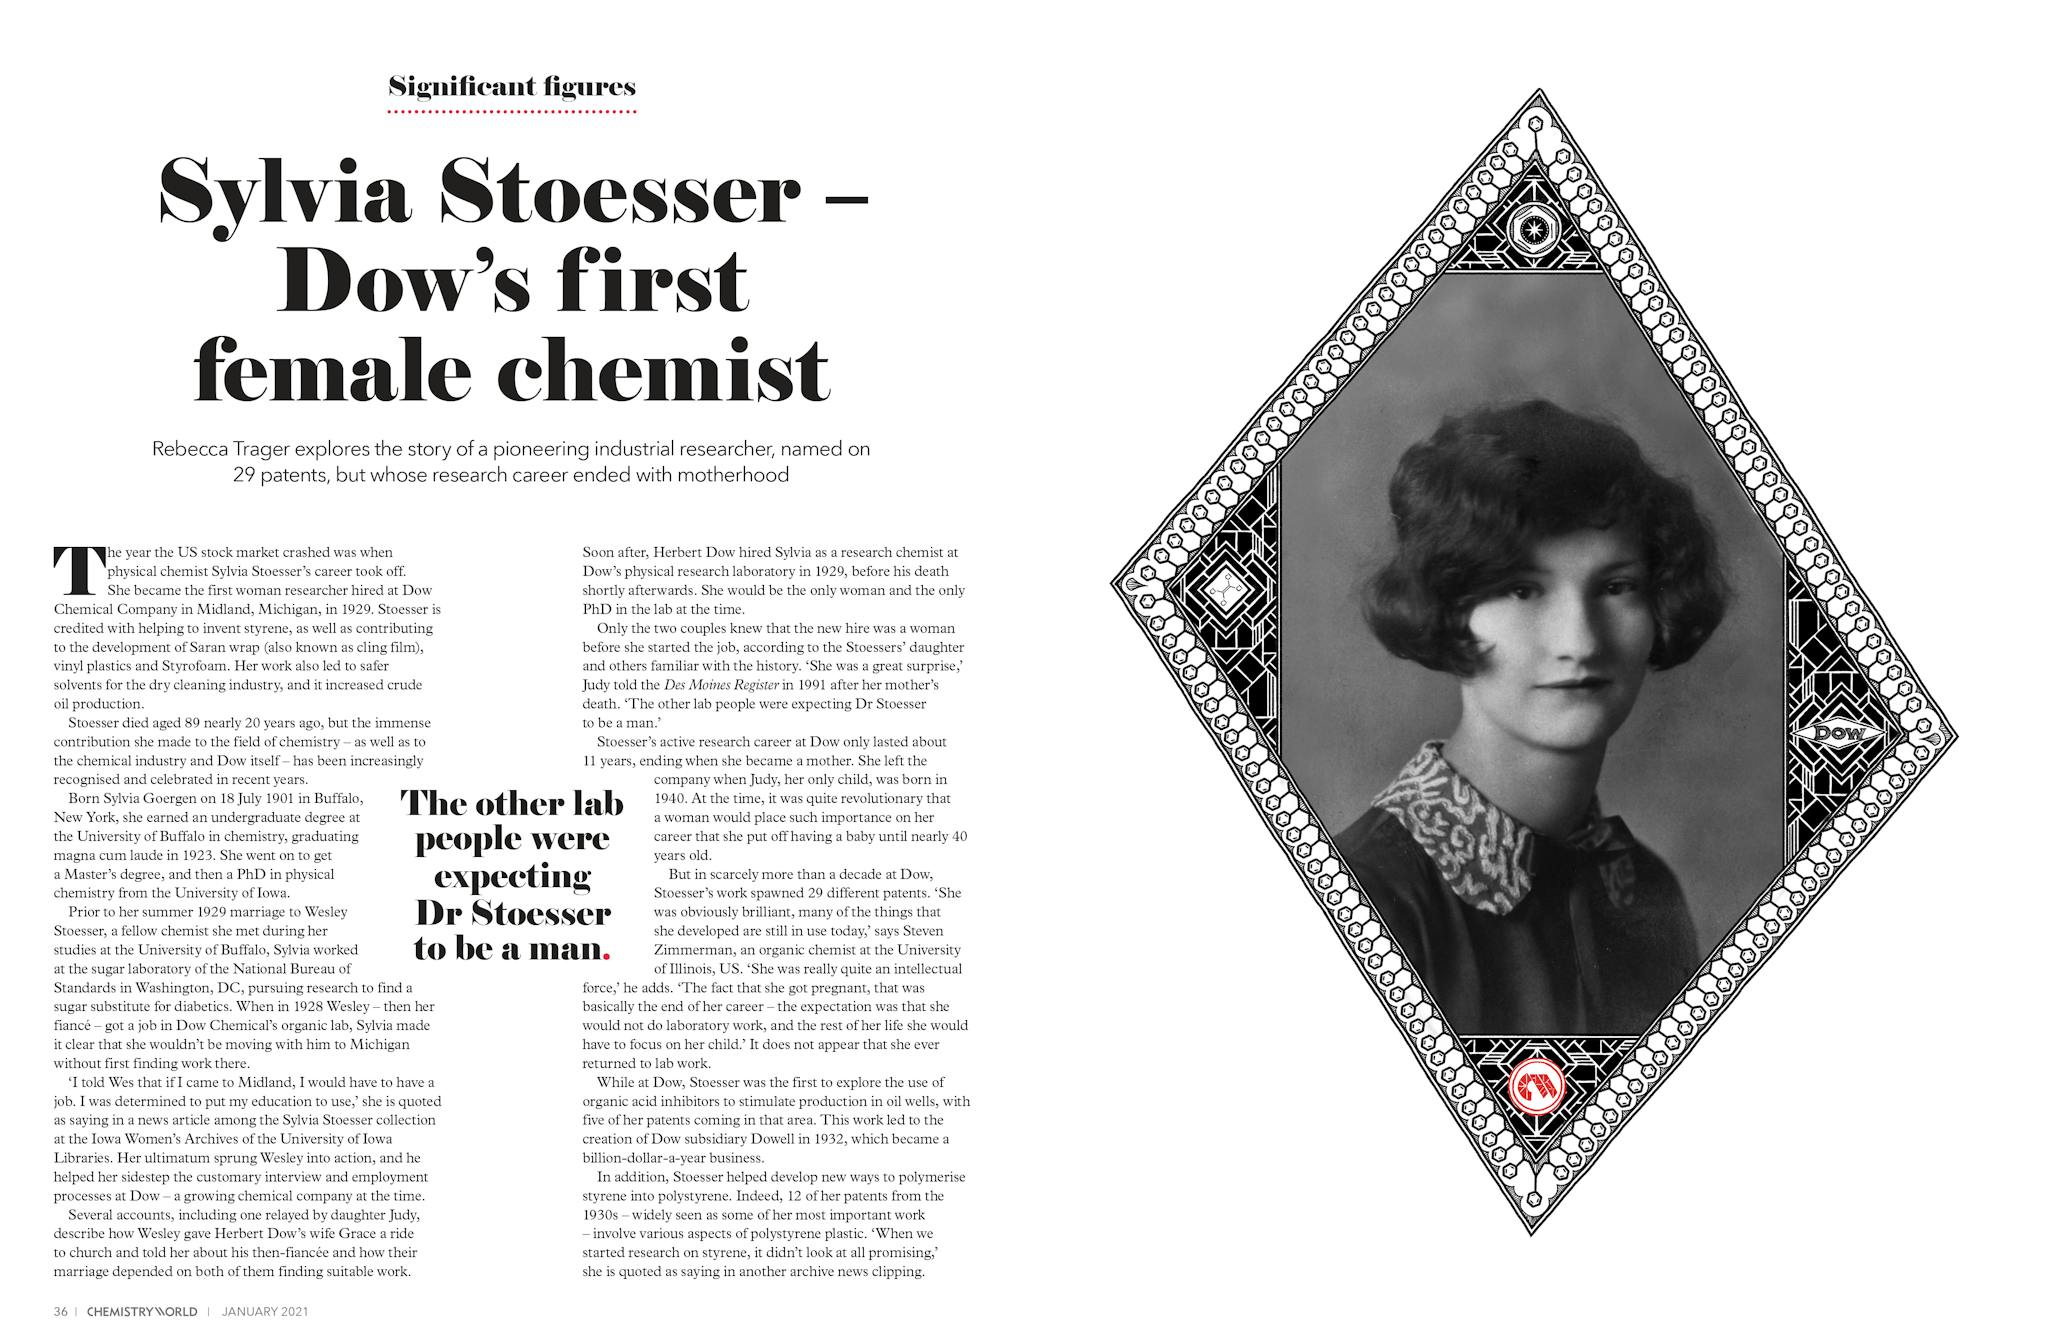 Entire article of Chemistry World about  Sylvia Stoesser